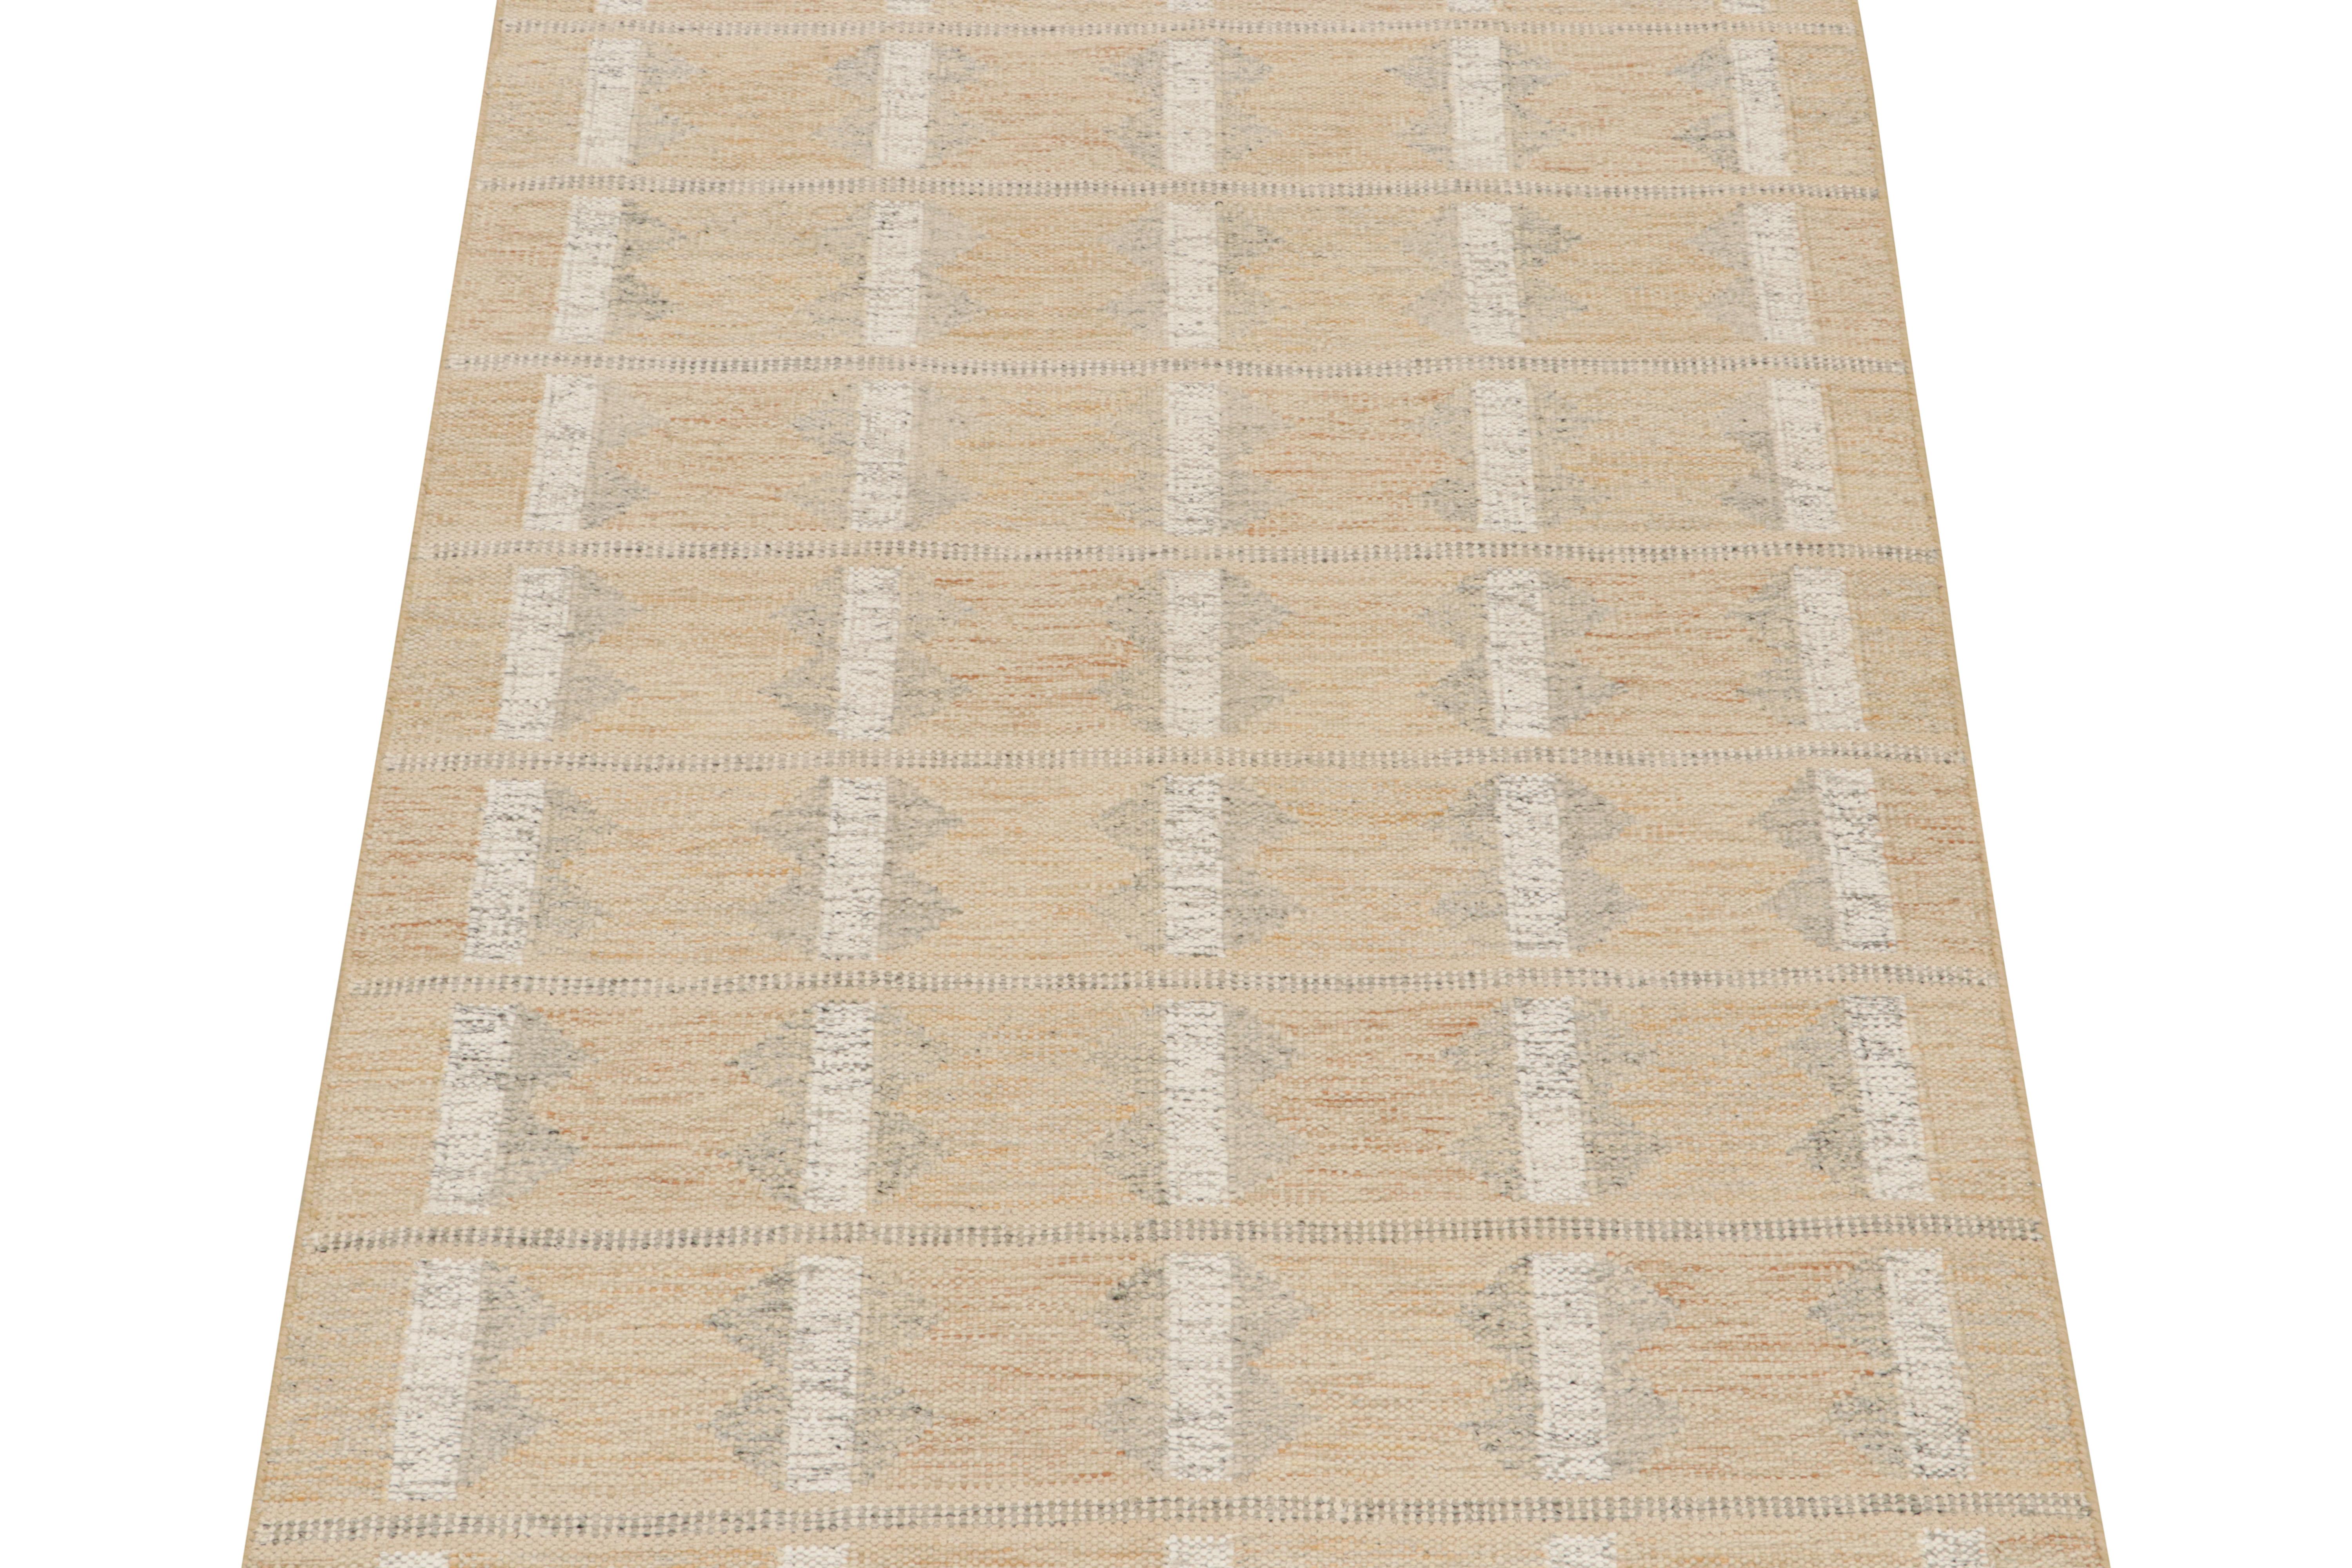 This 5x7 flat weave is a new addition to the Scandinavian Kilim collection by Rug & Kilim. Handwoven in wool and natural yarns, its design reflects a contemporary take on midcentury Rollakans and Swedish Deco style.

On the Design:

This new flat